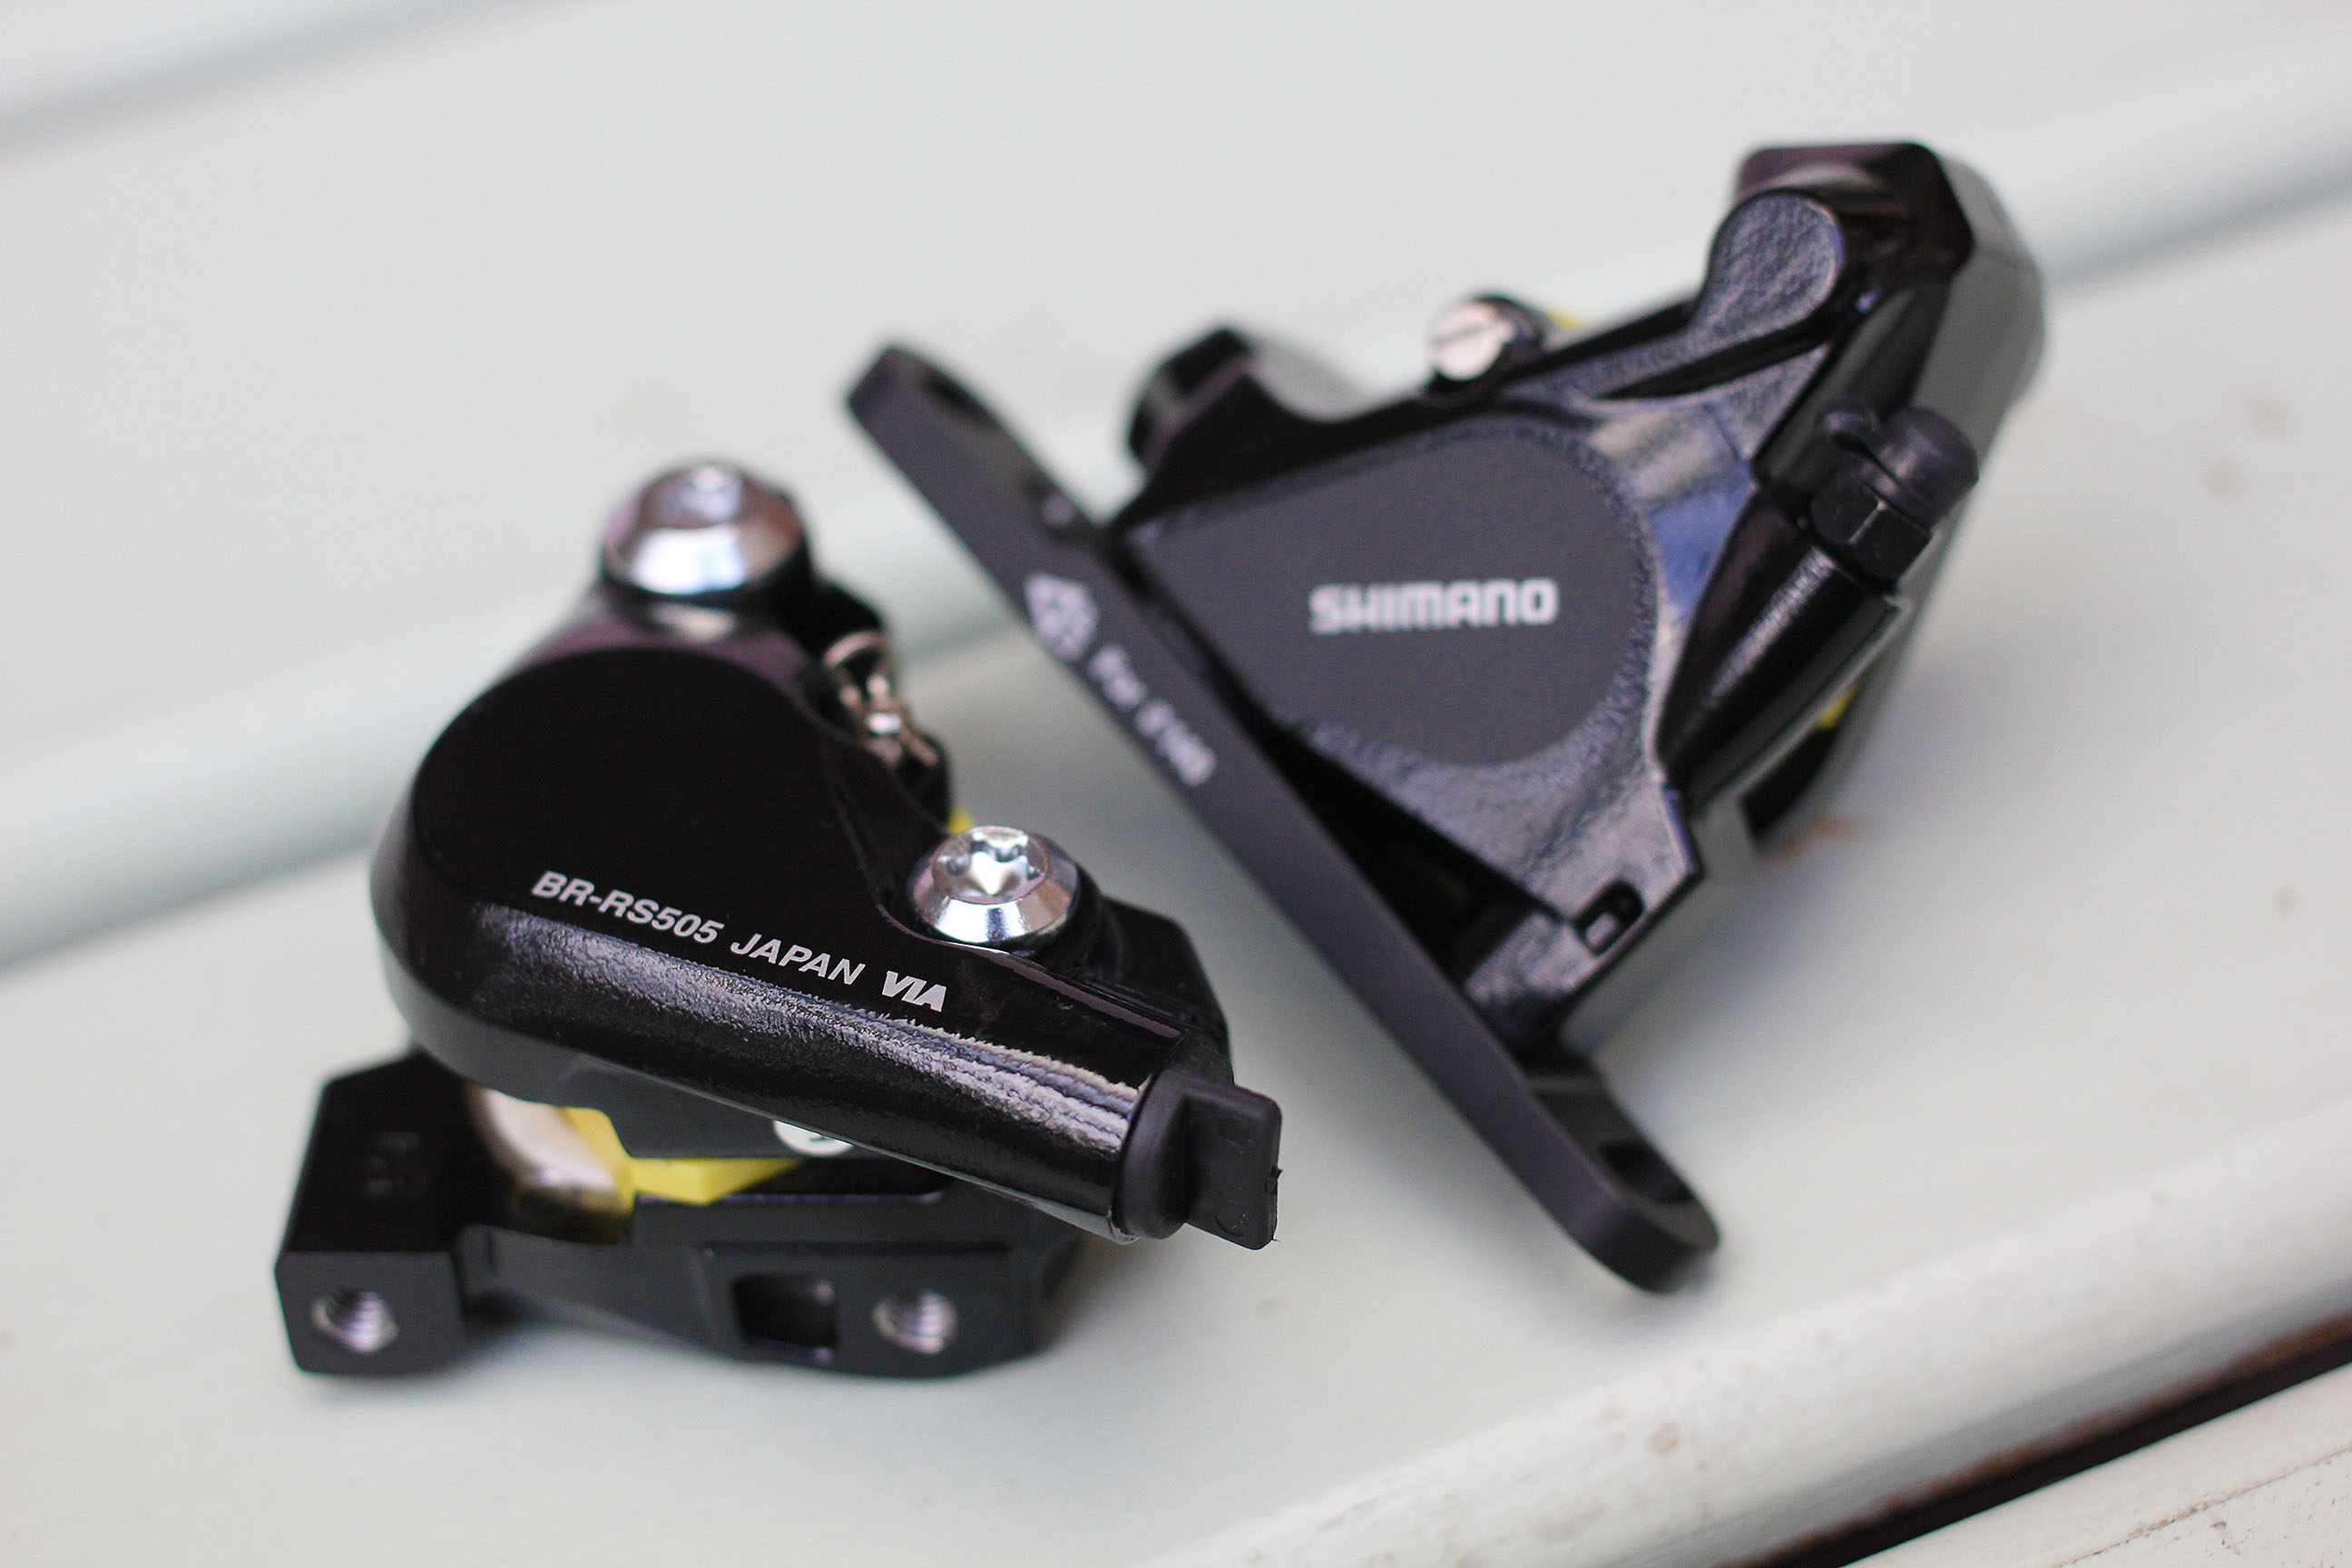 Shimano gestione cavi a sinistra st-rs505 st-rs405 y-03m74000 